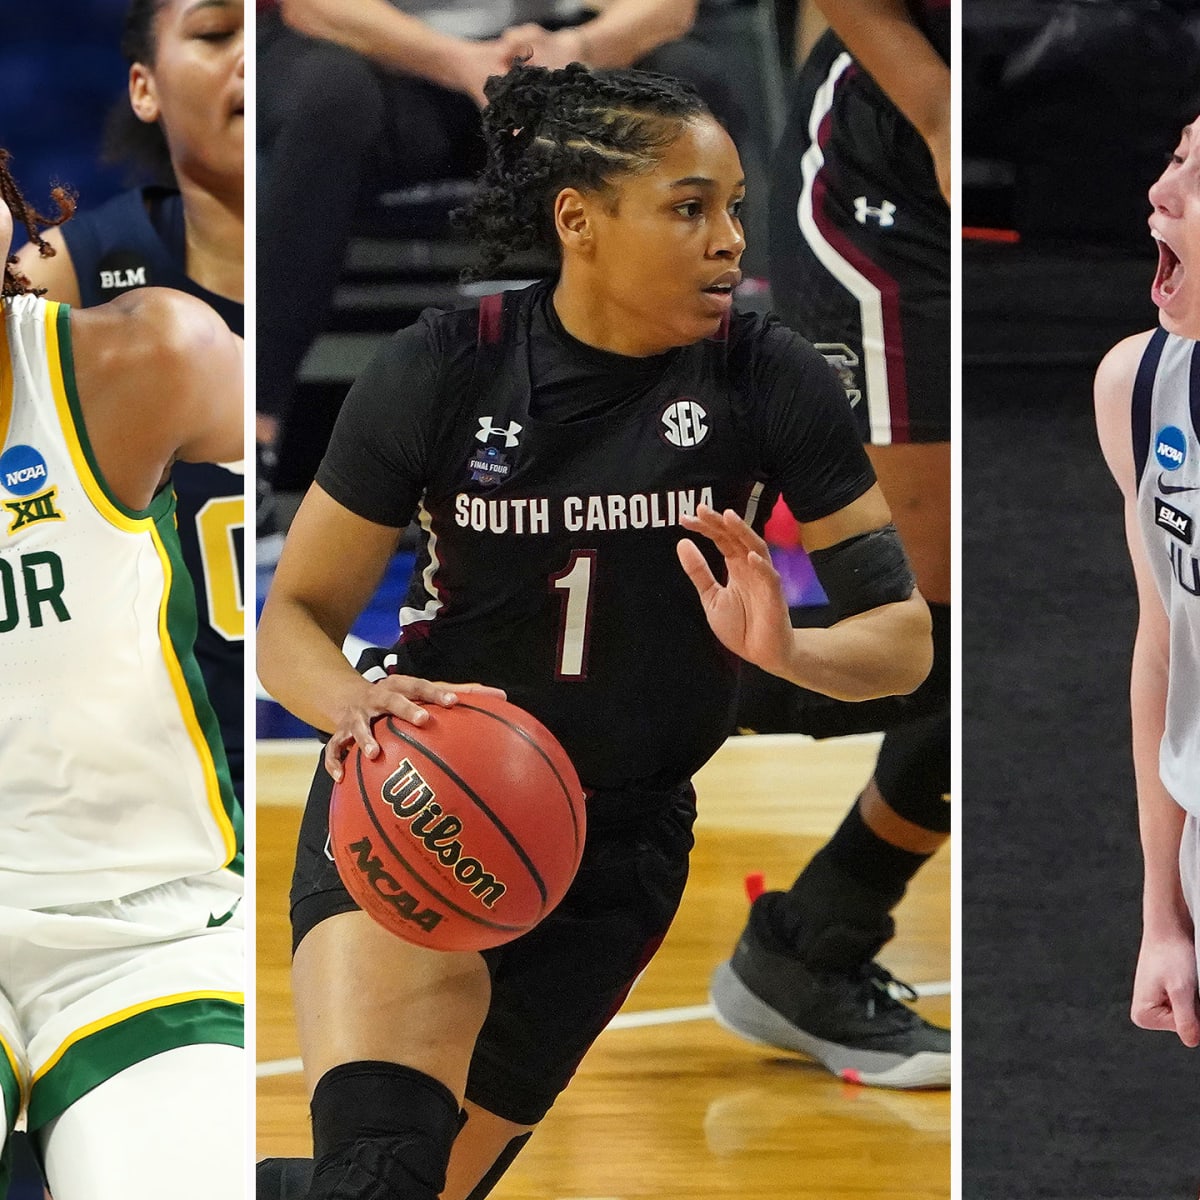 Womens college basketball early top 10 rankings for 2021-22